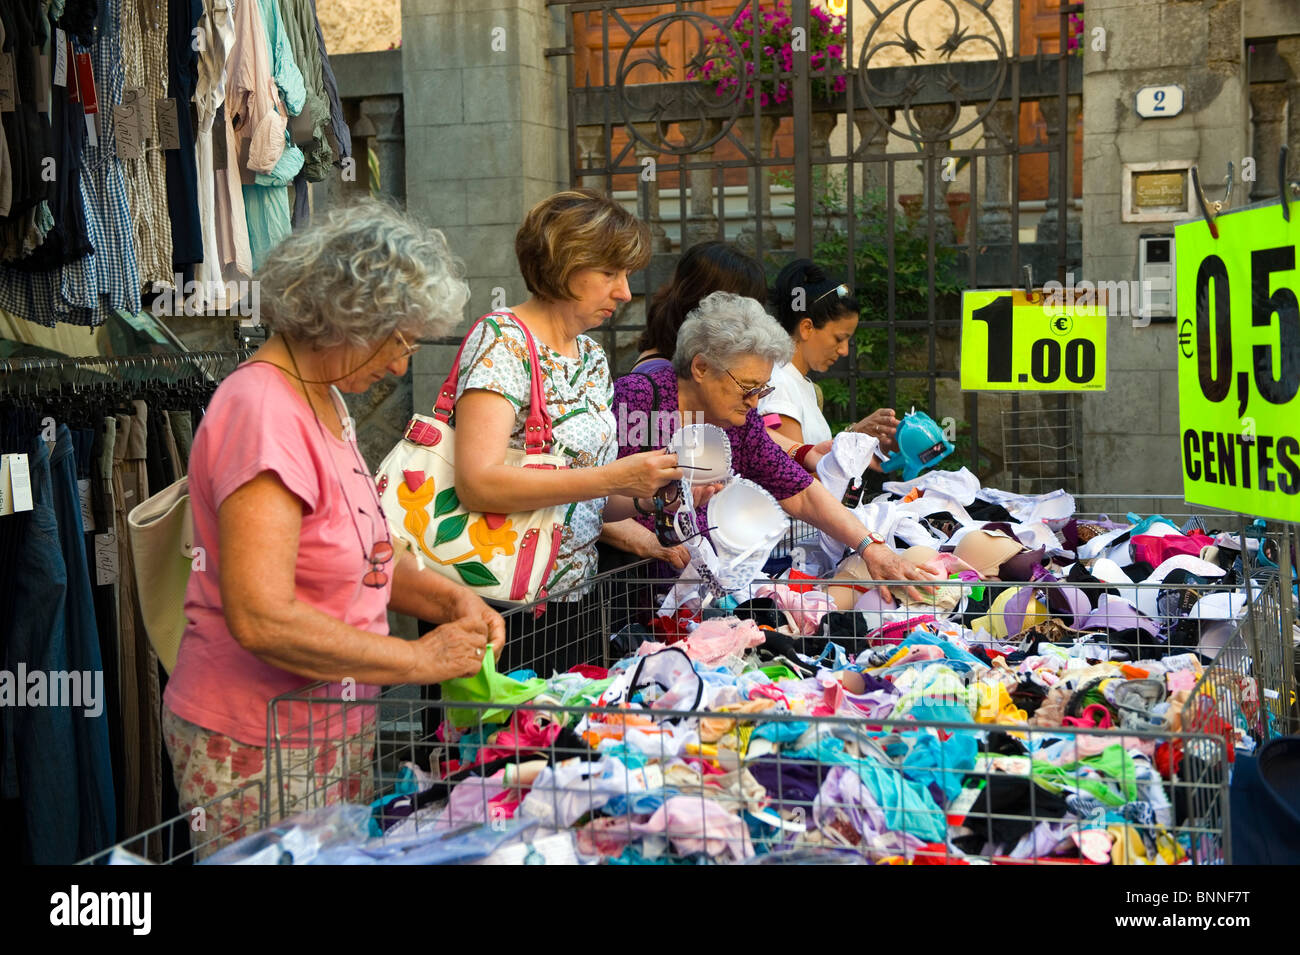 Italy. Tuscany. Colle di val d'Elsa. The weekly market. Shopping for Bras and Pants. Stock Photo